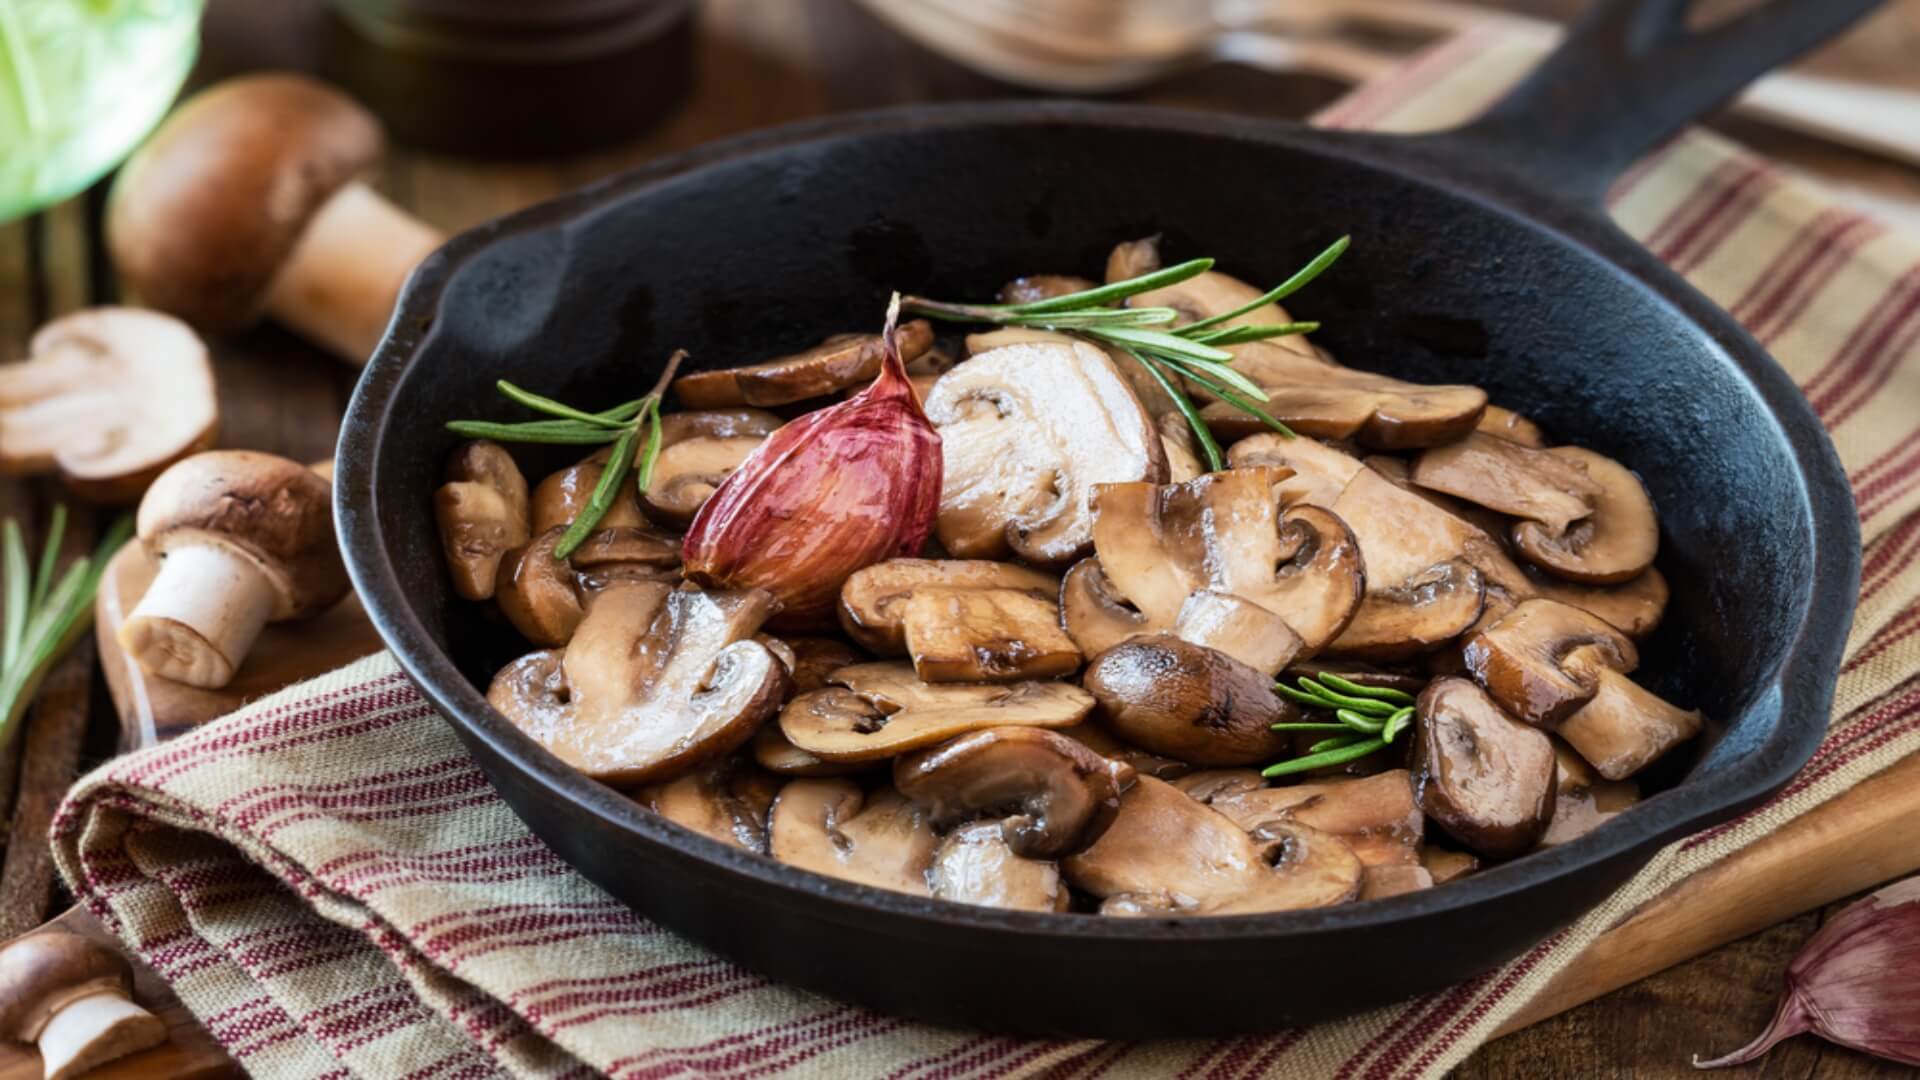 6 Kinds Of Medicinal Mushrooms And Their Health Benefits